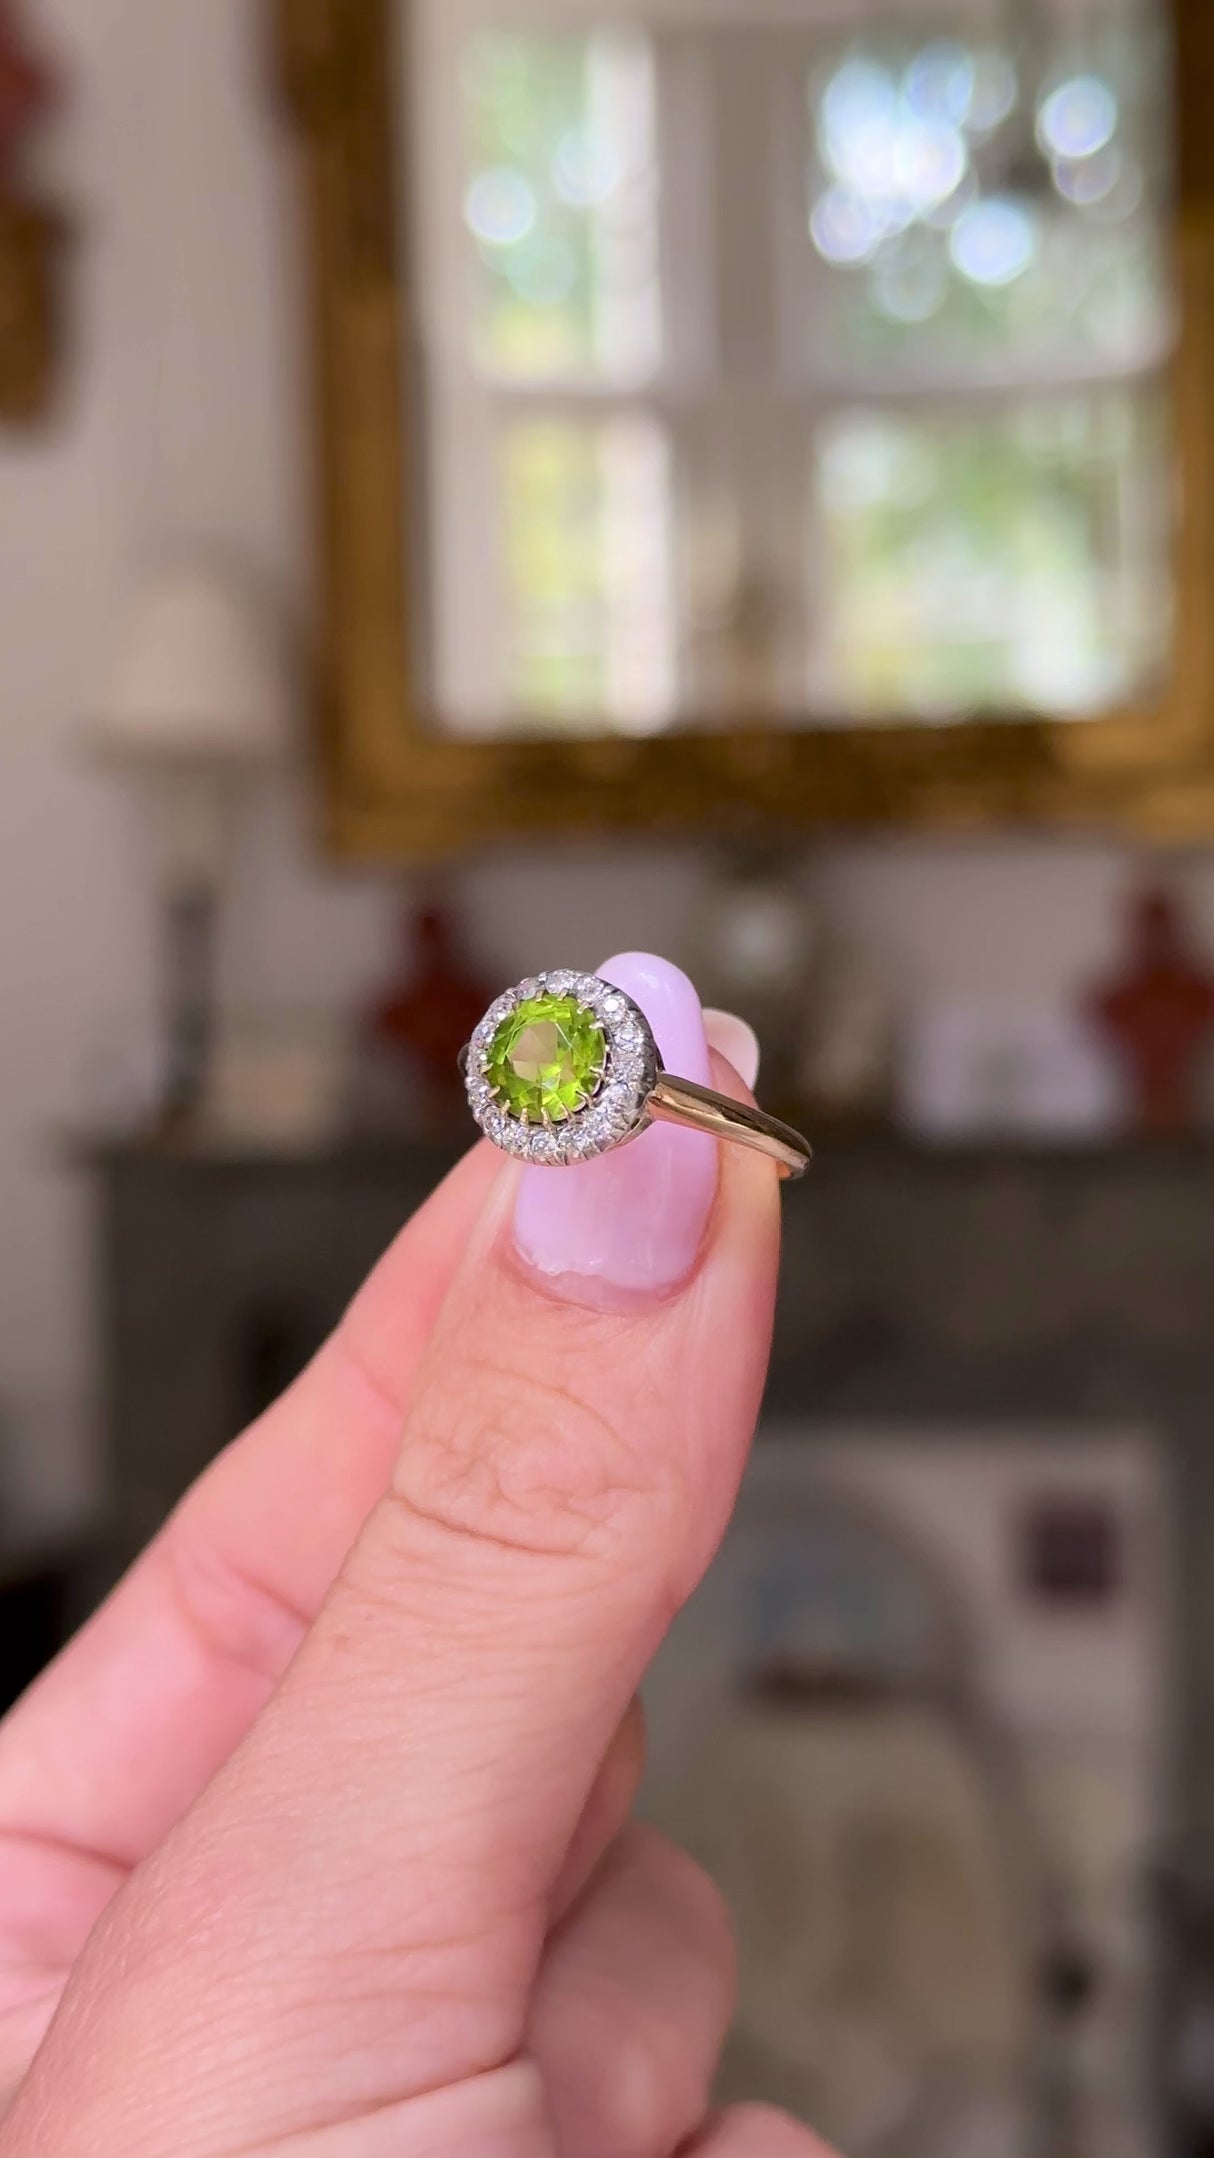 Edwardian peridot and diamond cluster ring, held in fingers and rotated to give perspective.